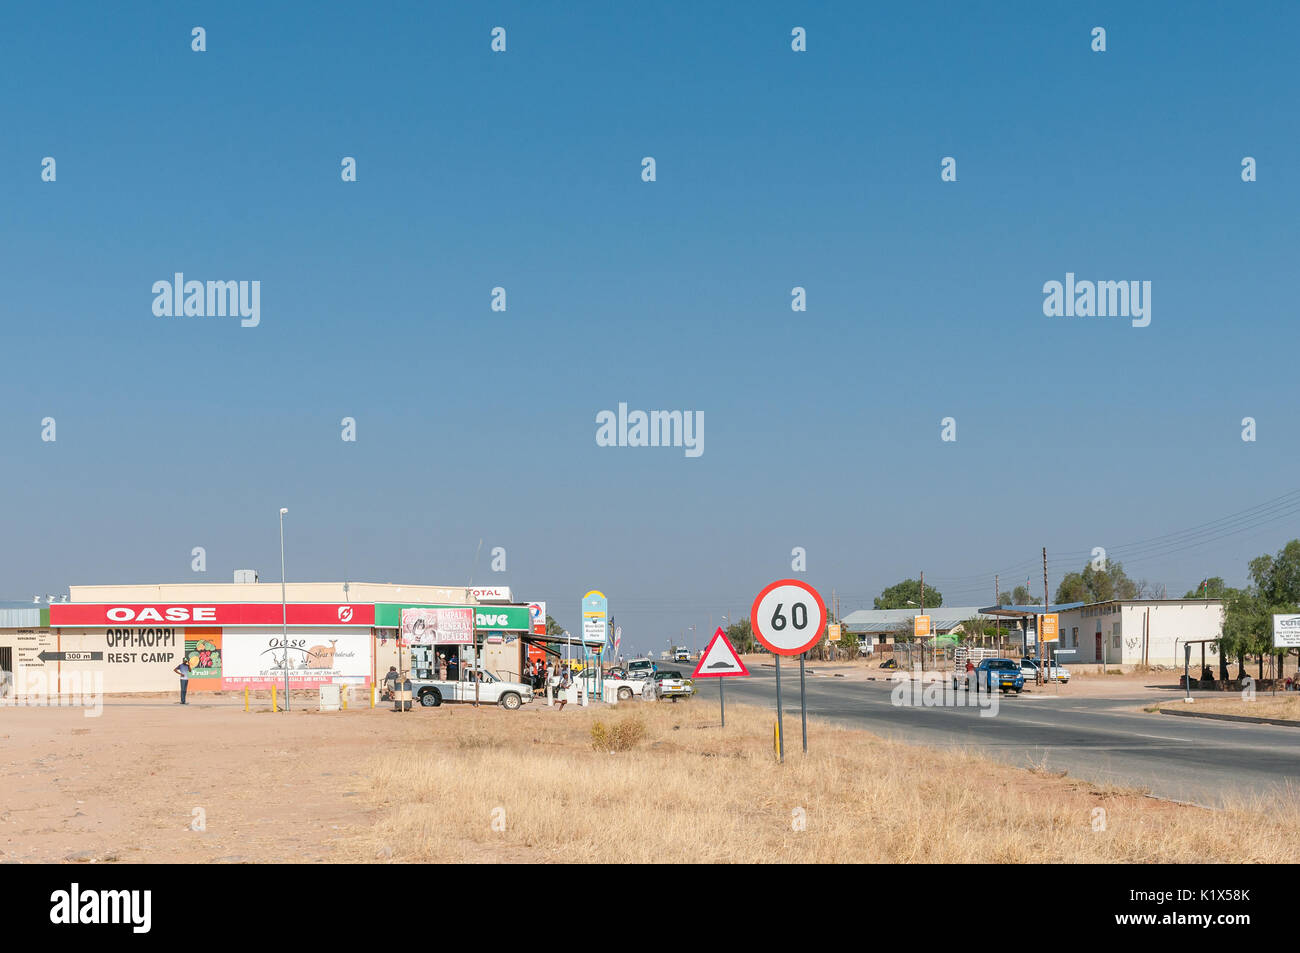 KAMANJAB, NAMIBIA - JUNE 27, 2017: A street scene with businesses and vehicles in Kamanjab, a small town in the Kunene Region of Namibia Stock Photo